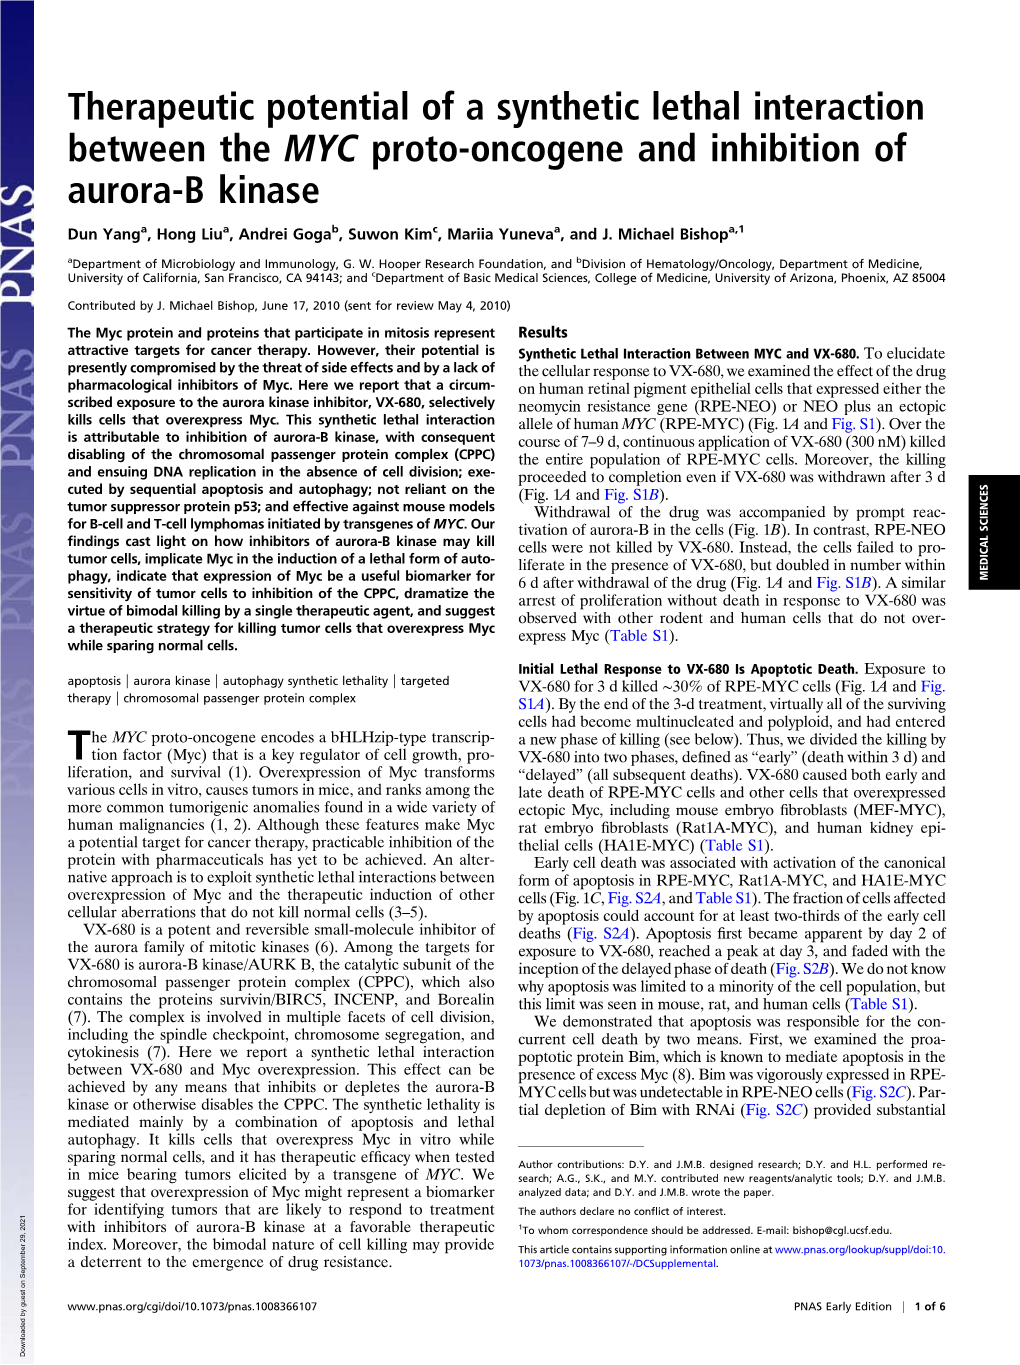 Therapeutic Potential of a Synthetic Lethal Interaction Between the MYC Proto-Oncogene and Inhibition of Aurora-B Kinase